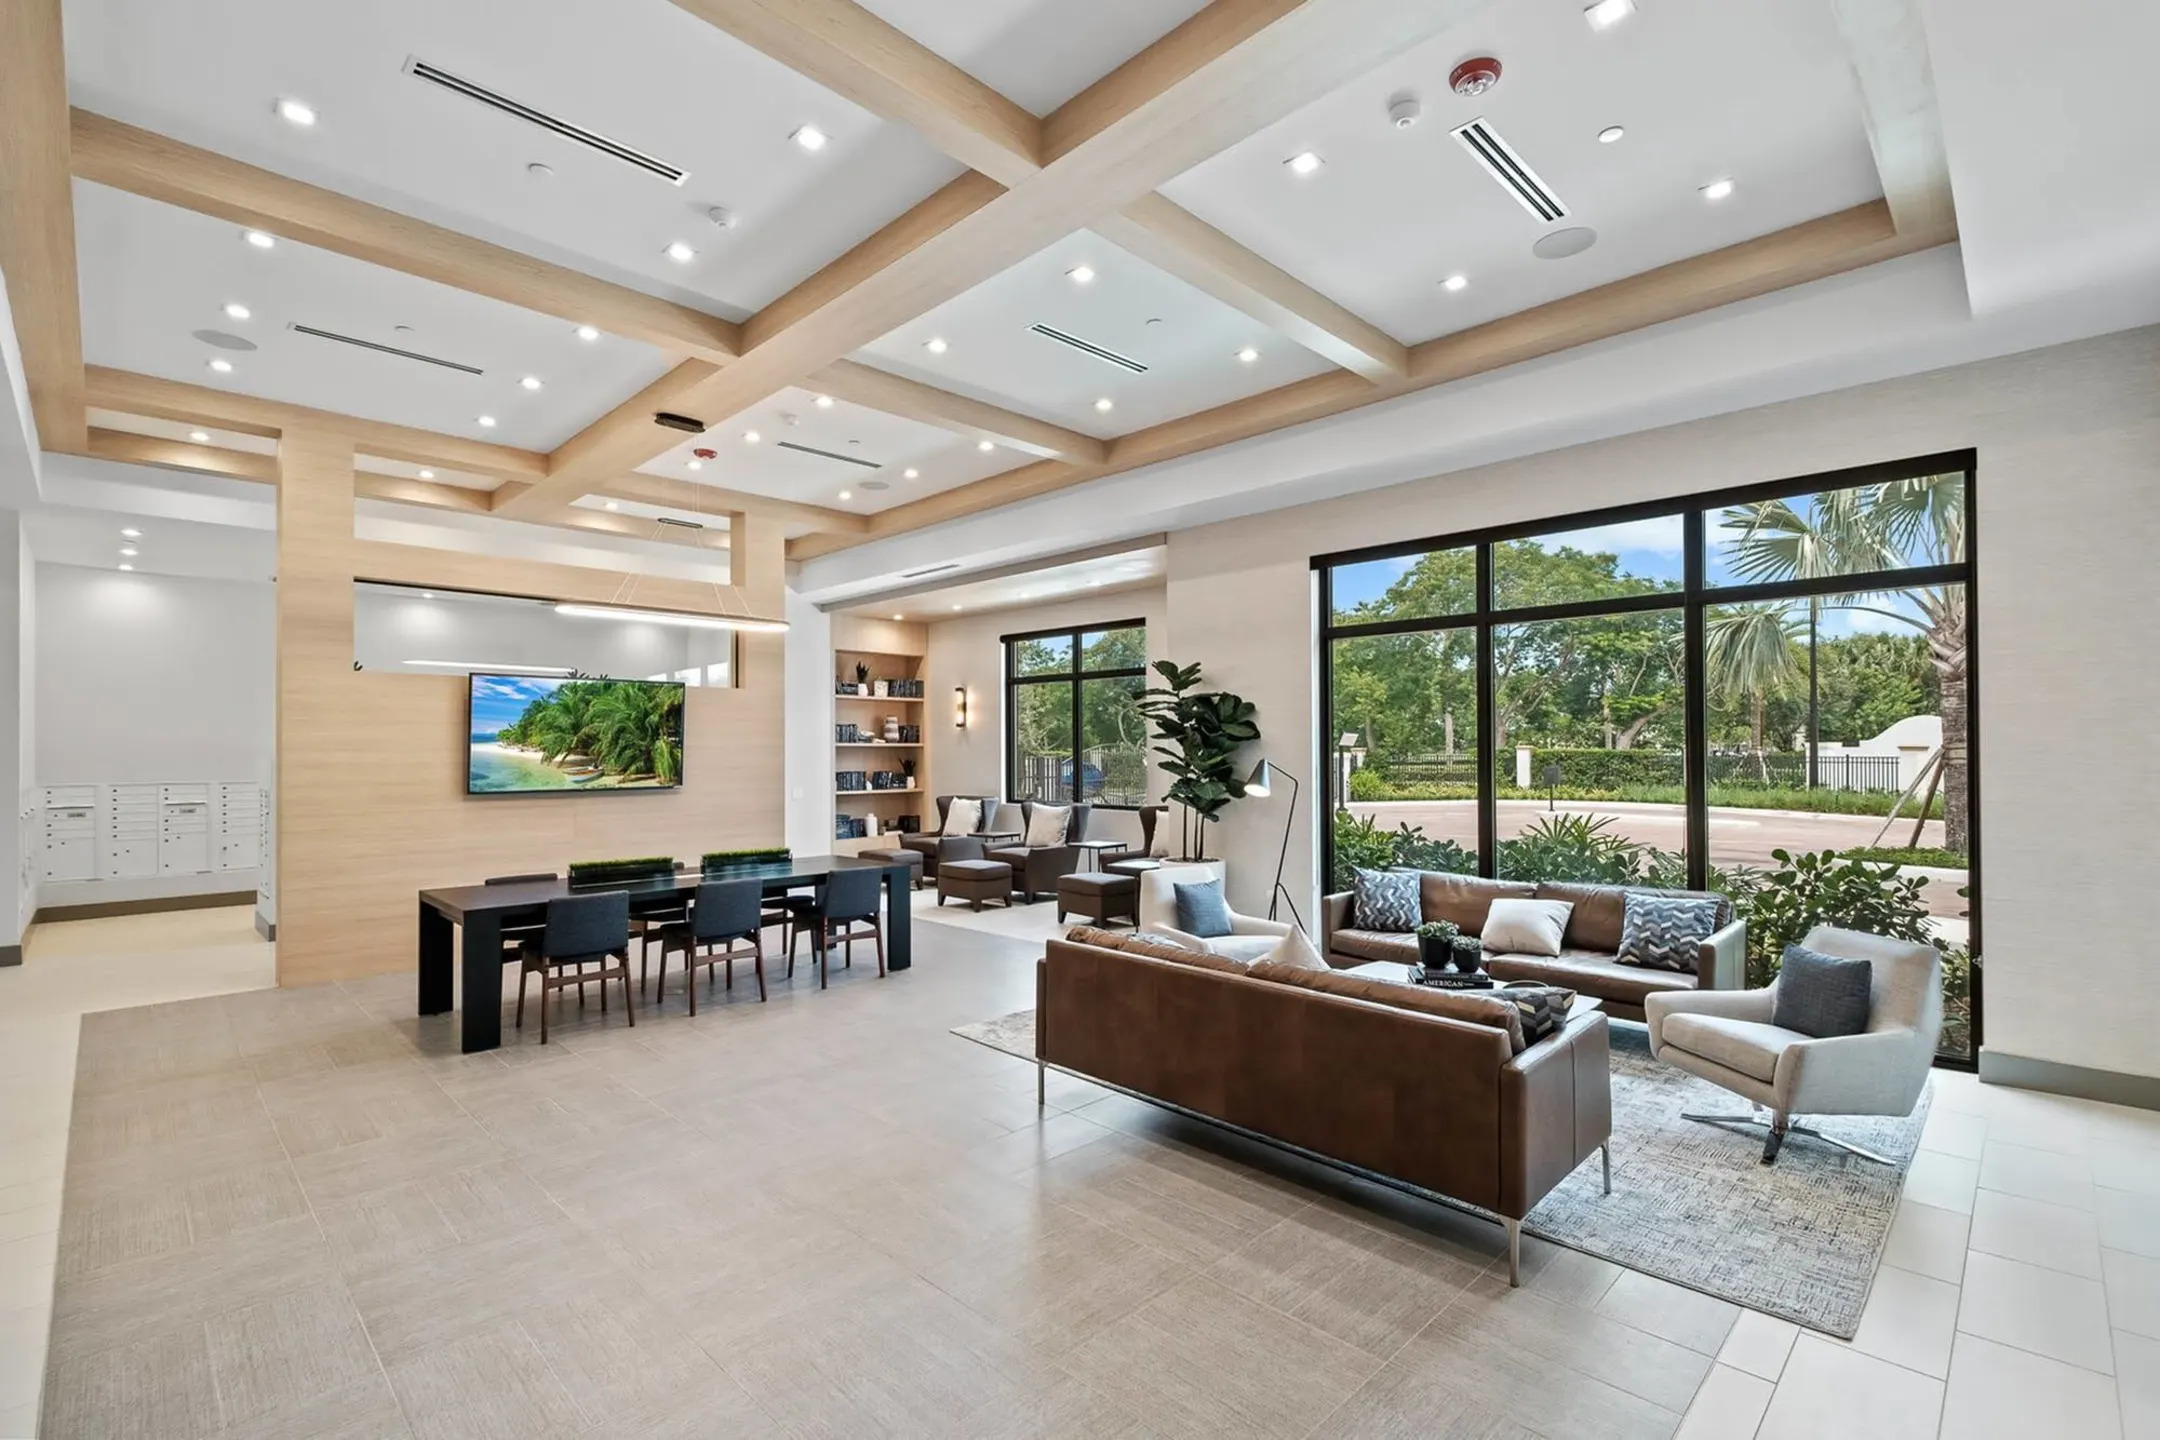 Living Room - The Residences at Monterra Commons - 55+ Active Adult Community - Pembroke Pines, FL